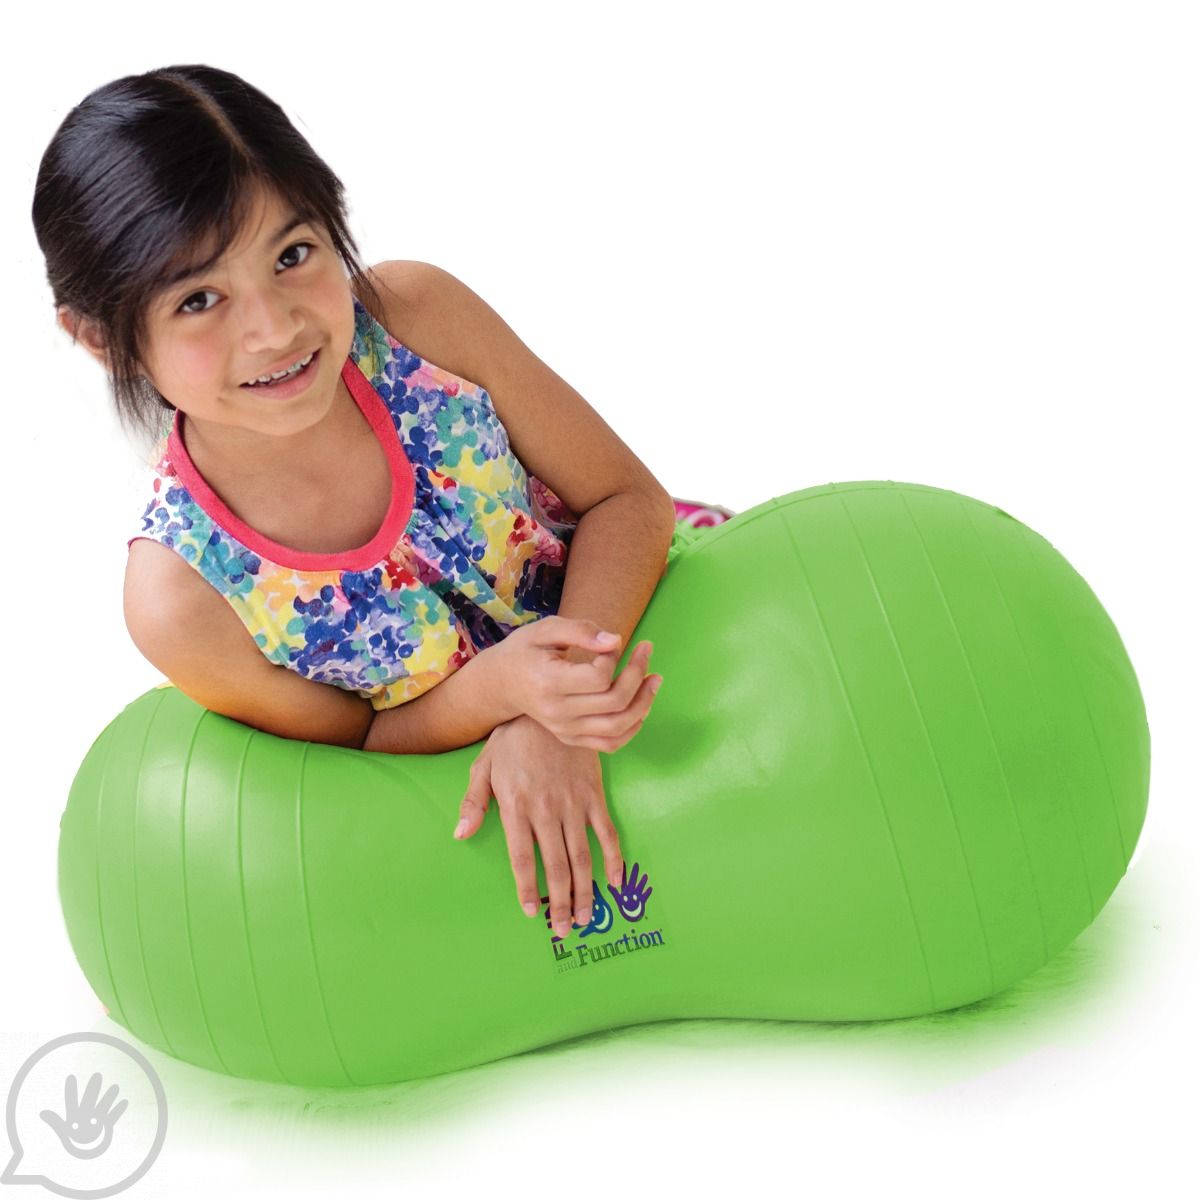 SENSORY ROOM AIRCHAIR GREEN SOFT PLAY AUTISM ASPERGES ADHD RELAX CHILL MOOD 